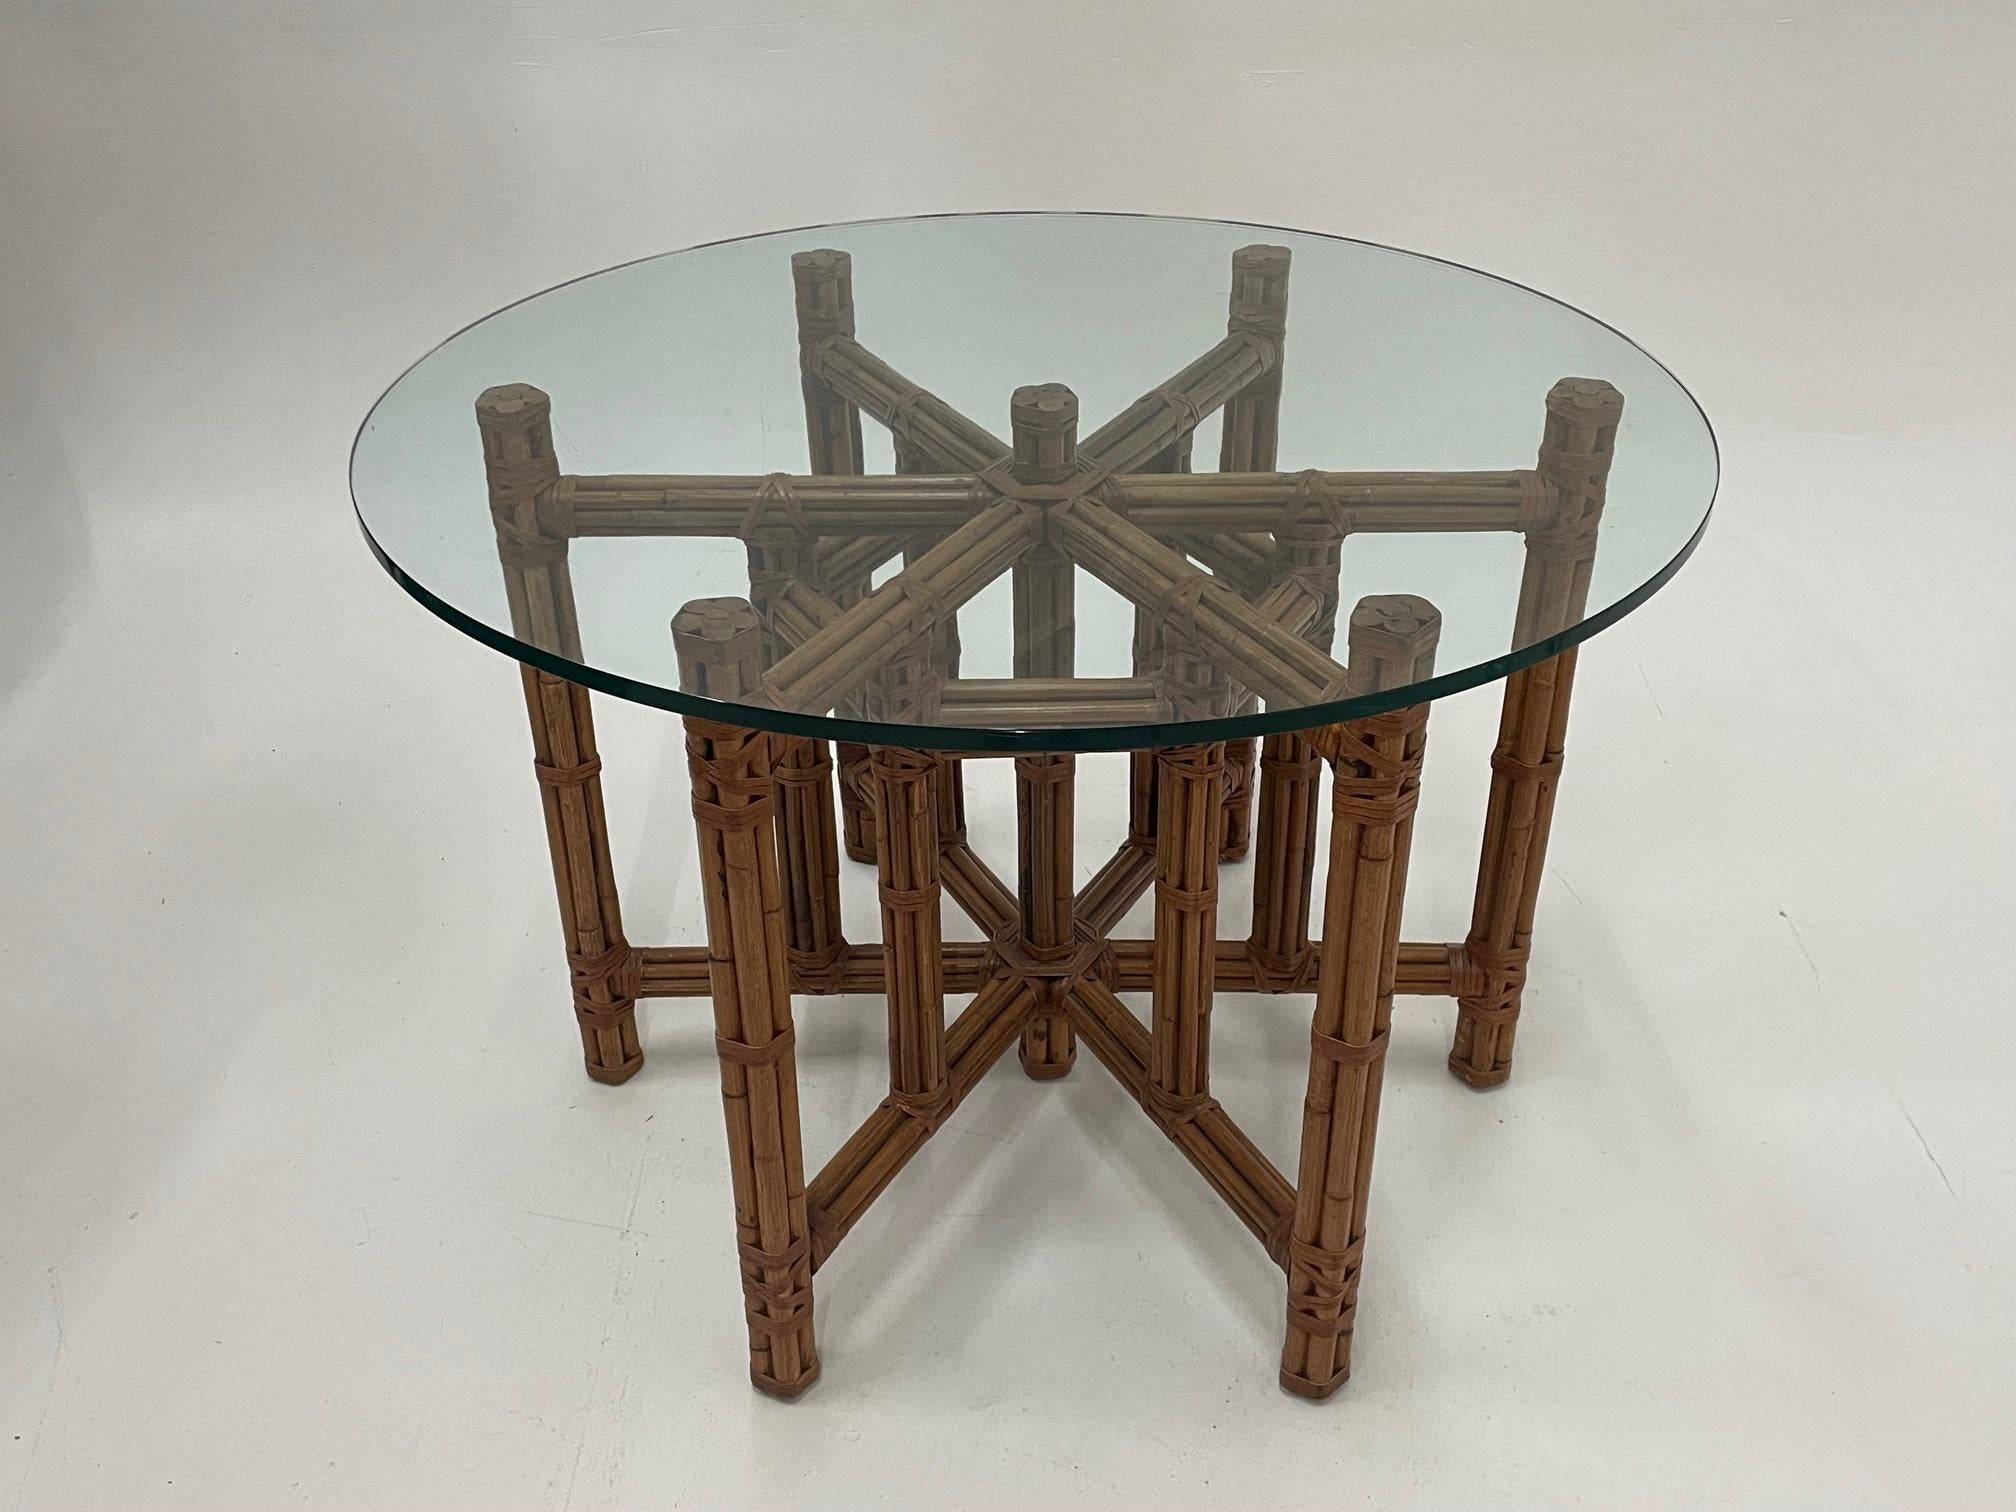 Classic McGuire dining table base with their signature bamboo and rattan handiwork wrapped with pieces of leather. Glass not included. Base serves well for 48